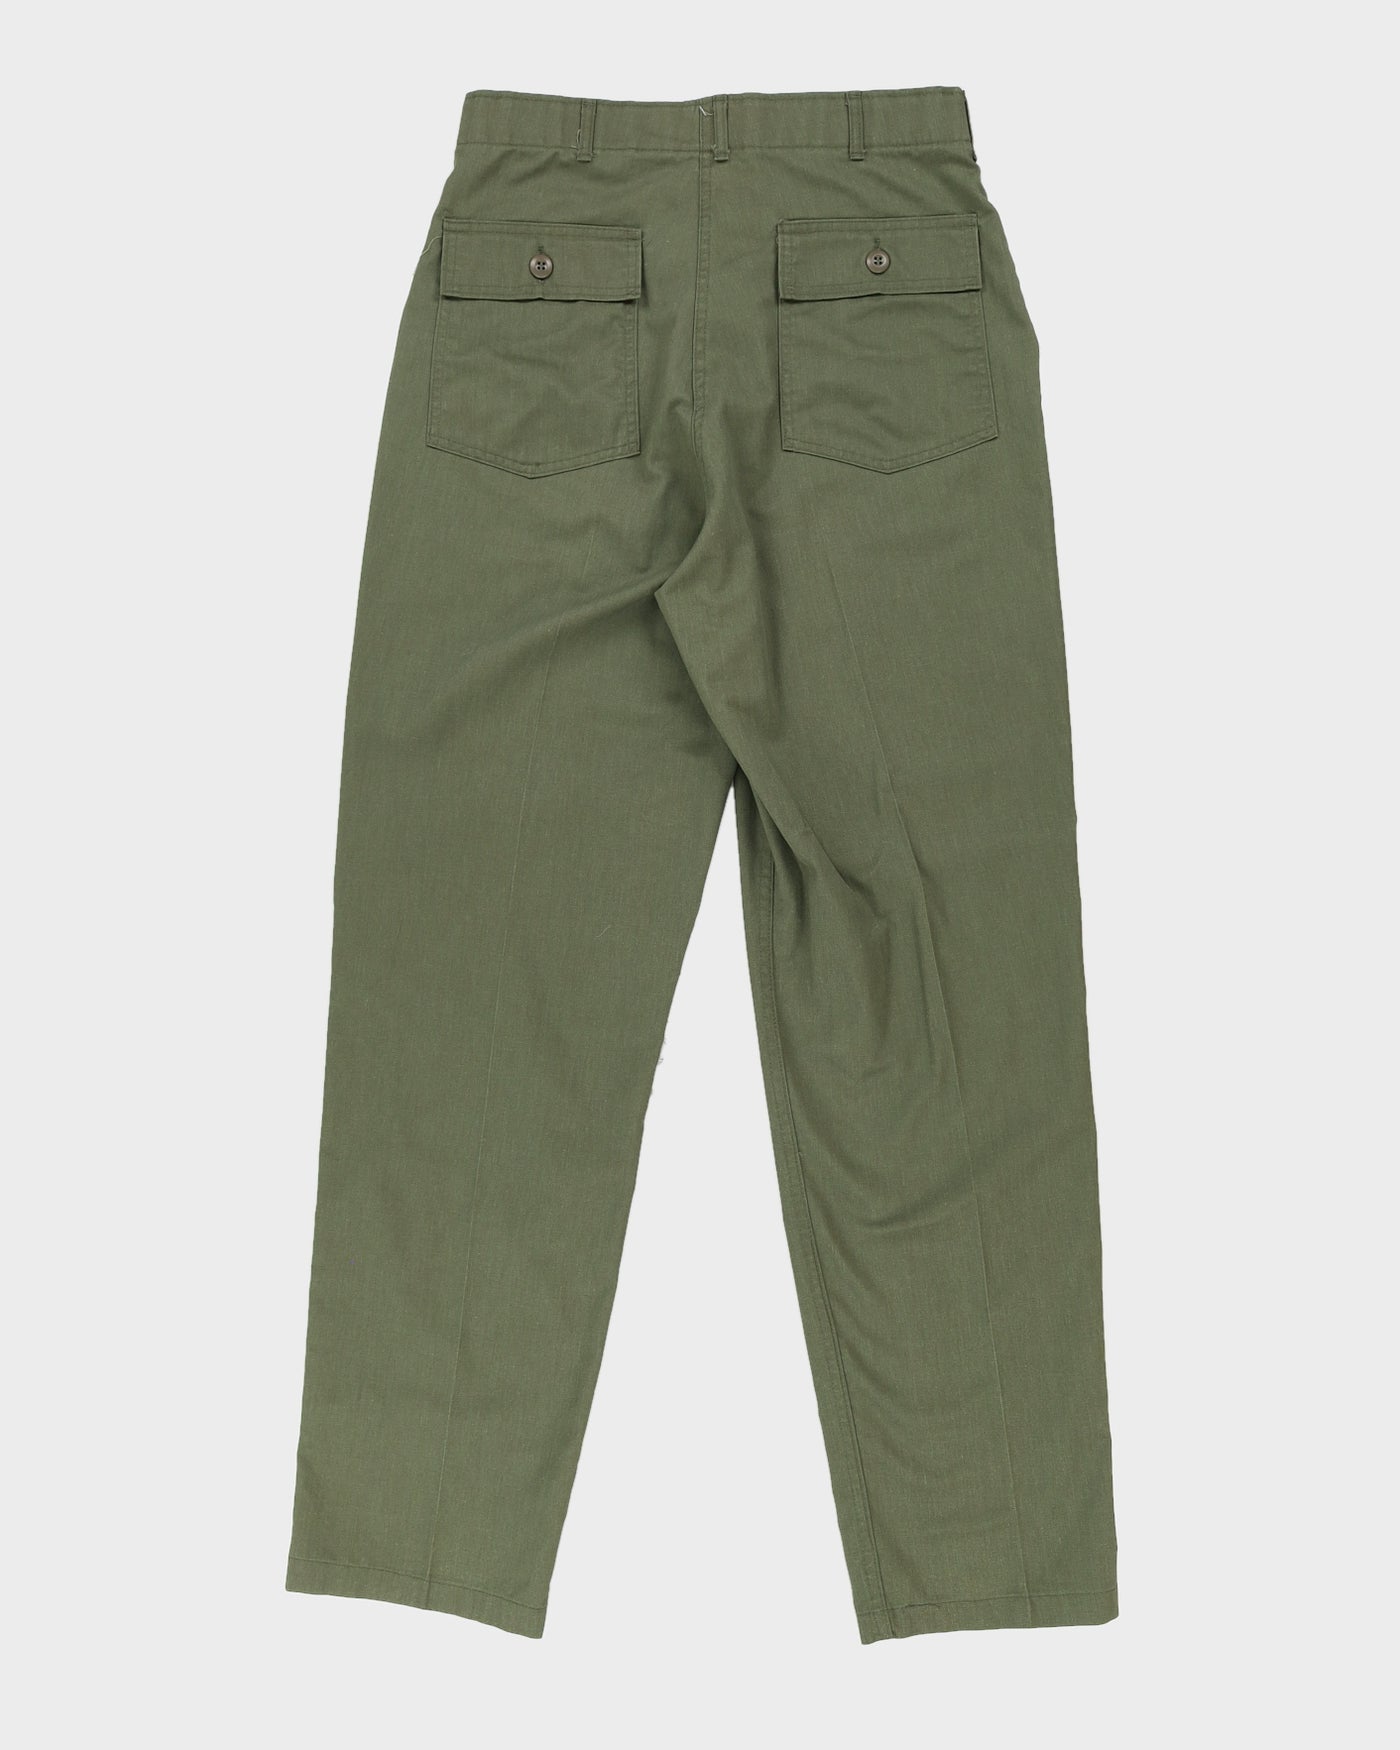 70s US Army OG-507 Trousers - 34x34